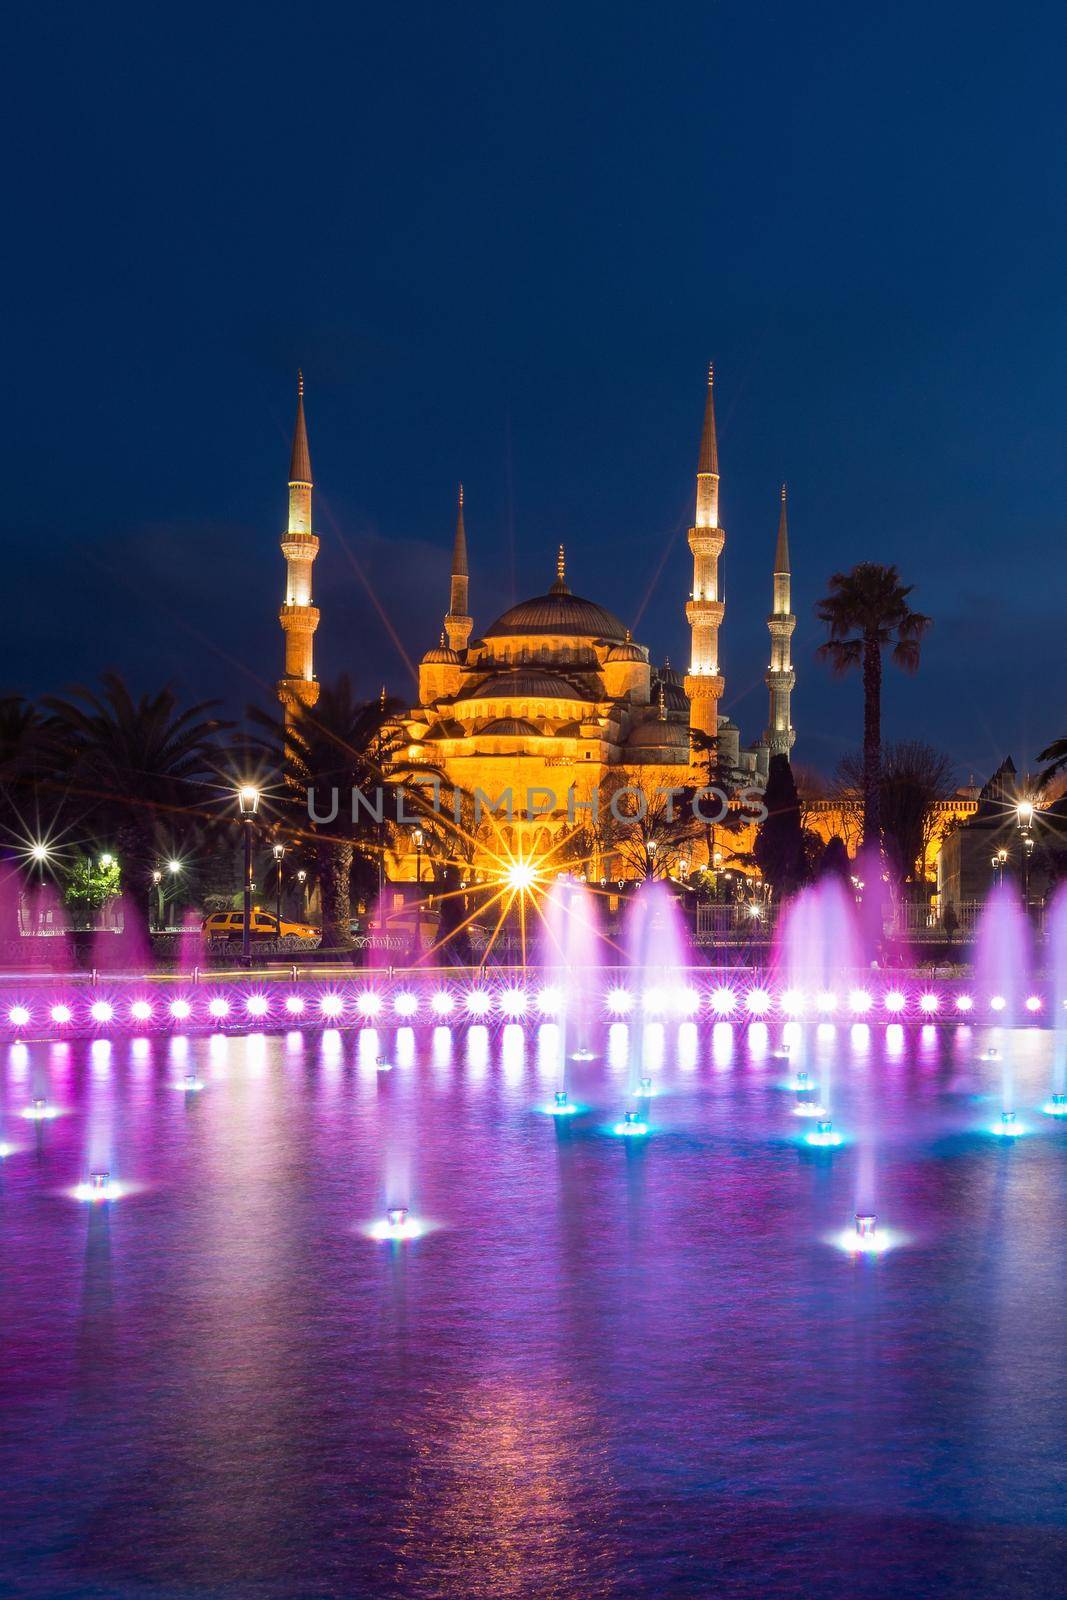 The Blue Mosque at Sultanahmet square in the evening, Istanbul, Turkey. Blue Mosque is the biggest mosque in Istanbul. by Nuamfolio